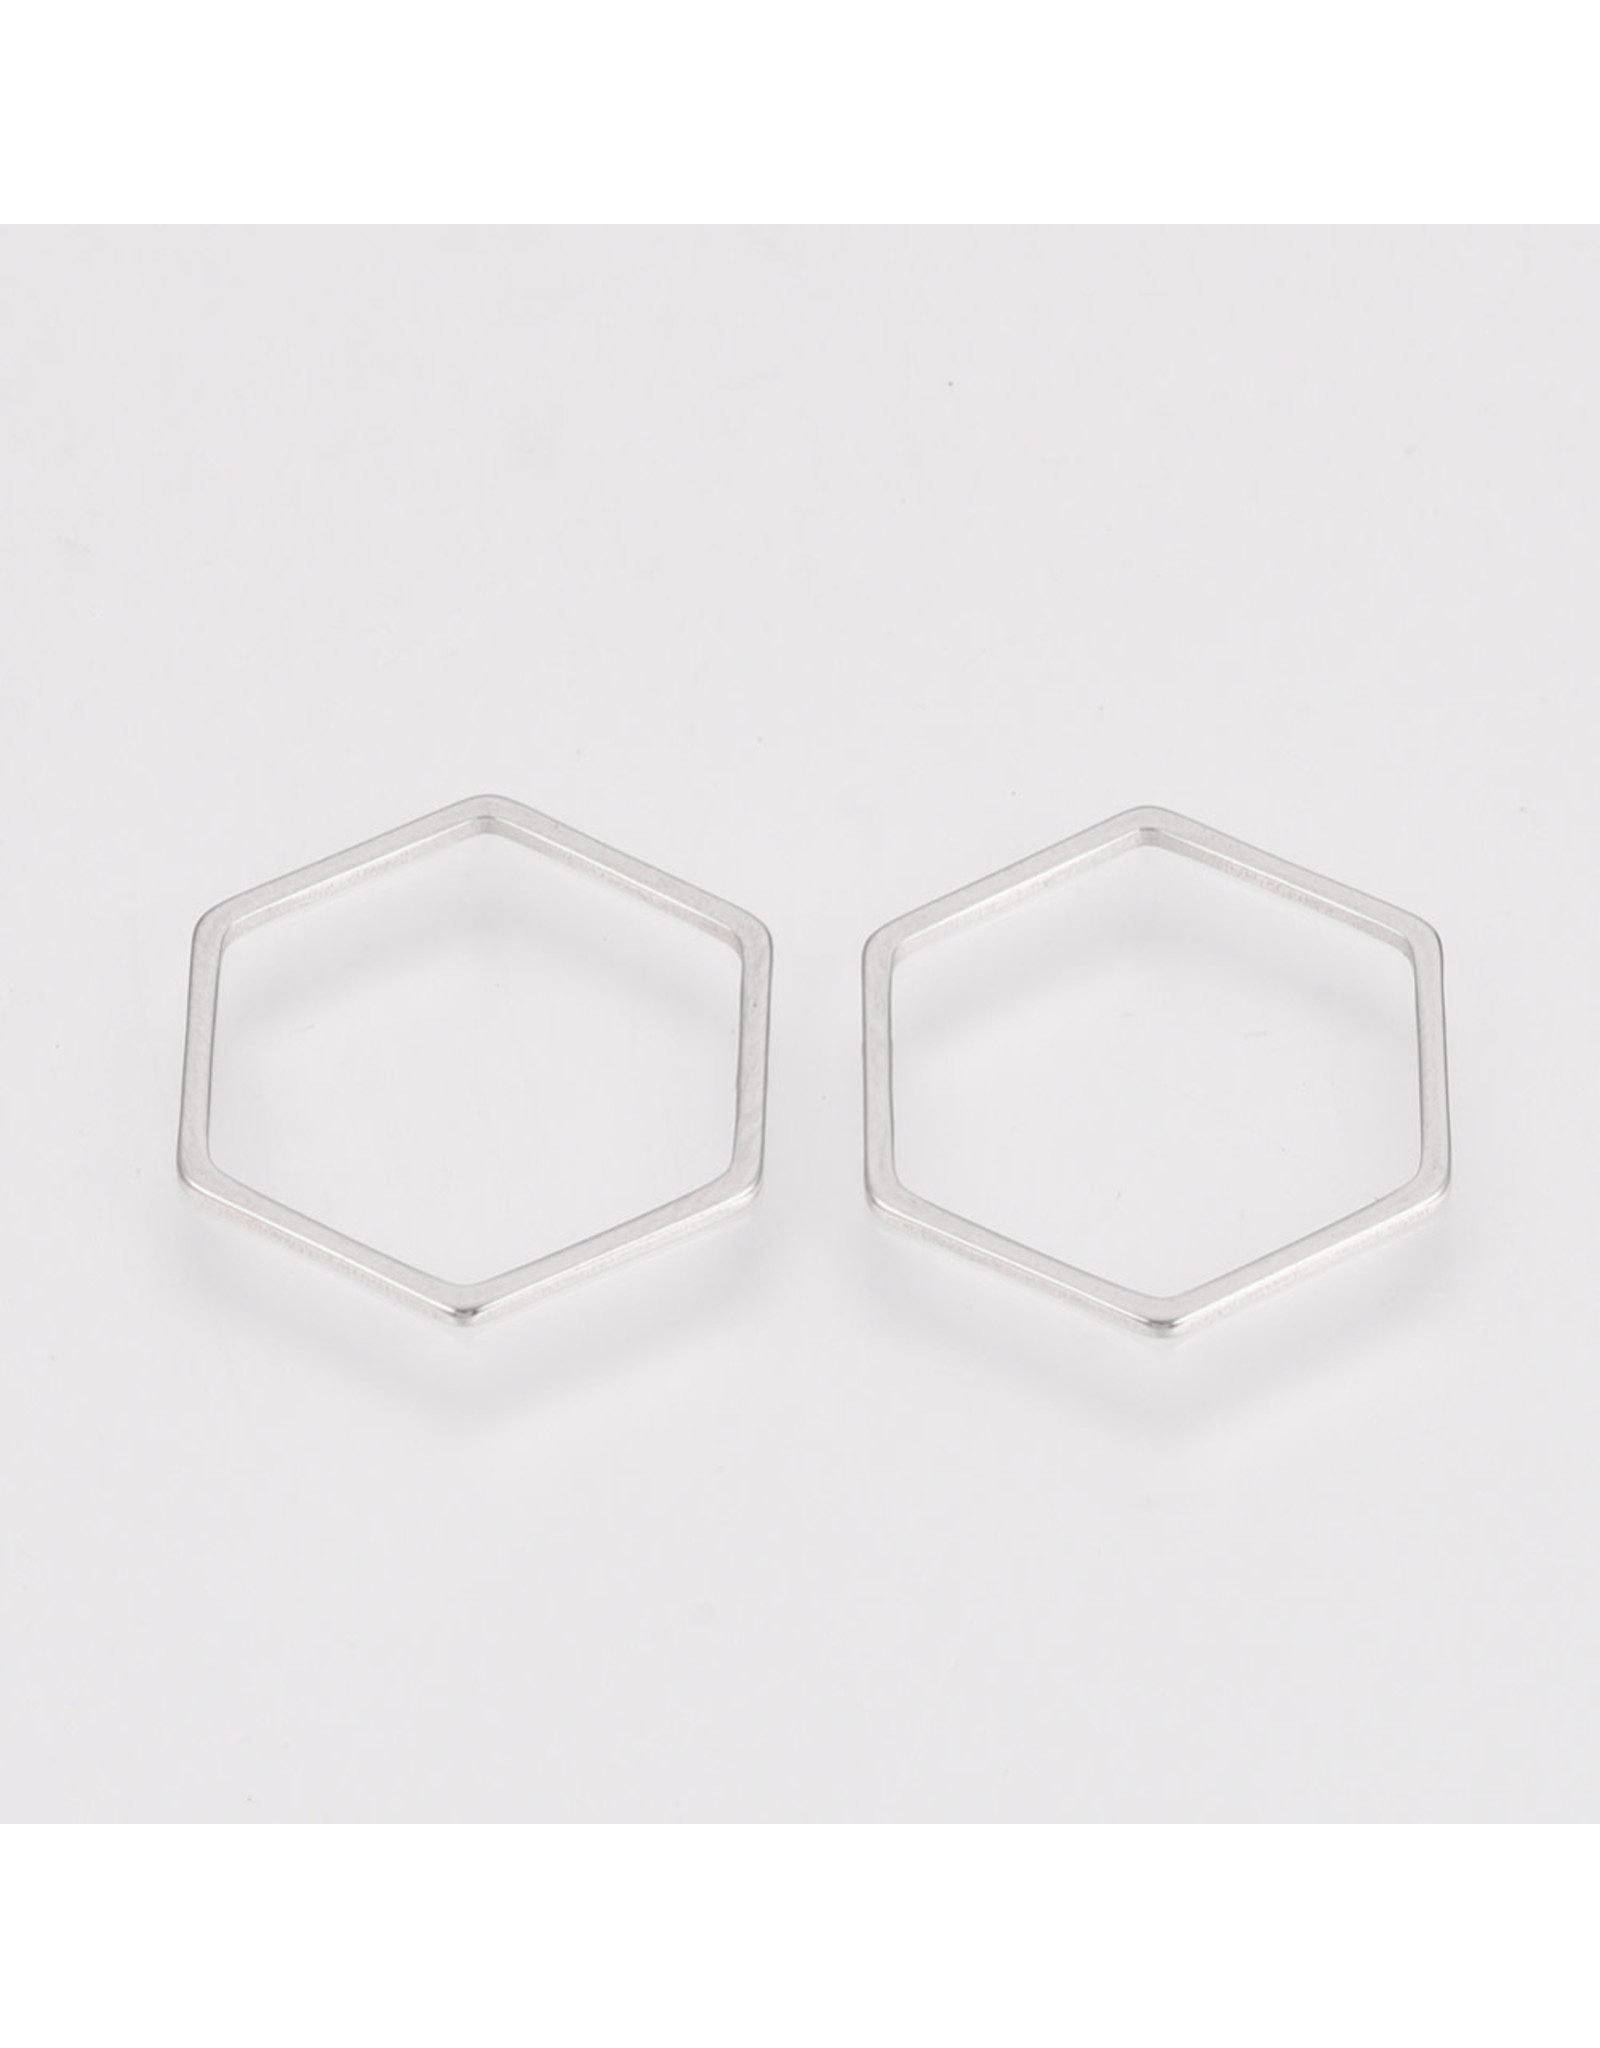 Hexagon Link  20x23mm Stainless Steel  x6  NF